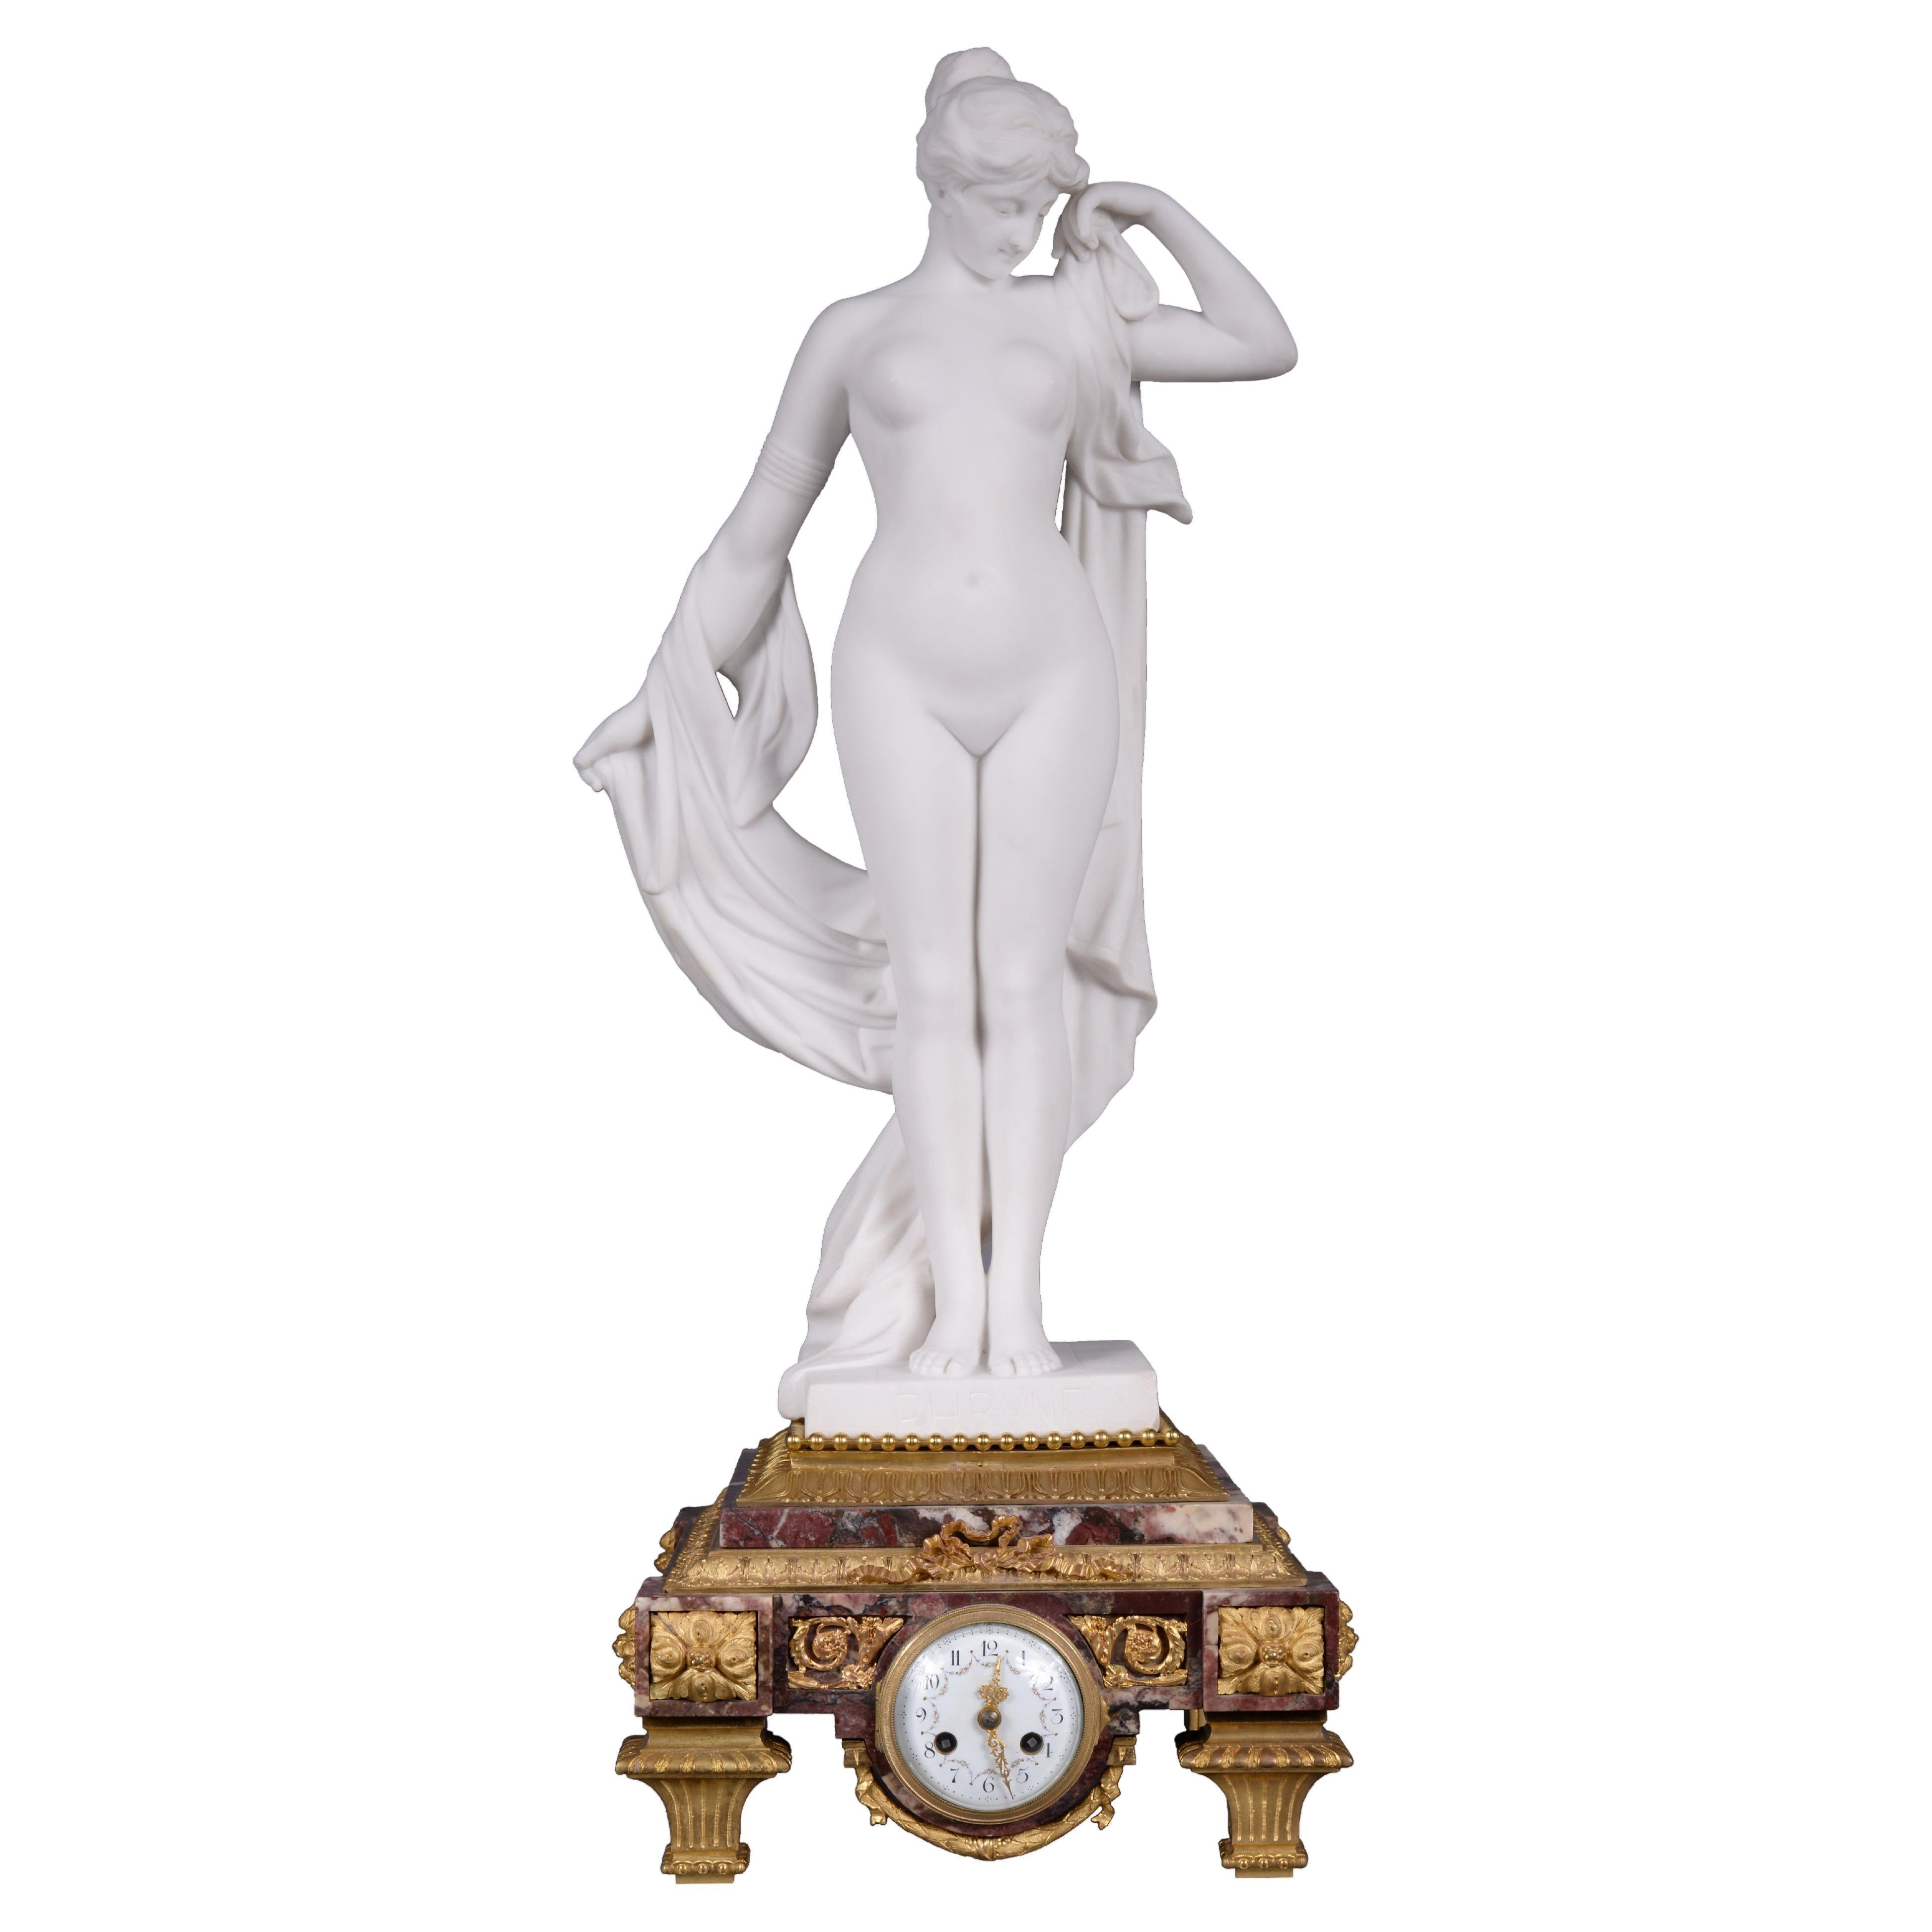 Marble and gilt bronze clock surmounted by a statuary white marble sculpture